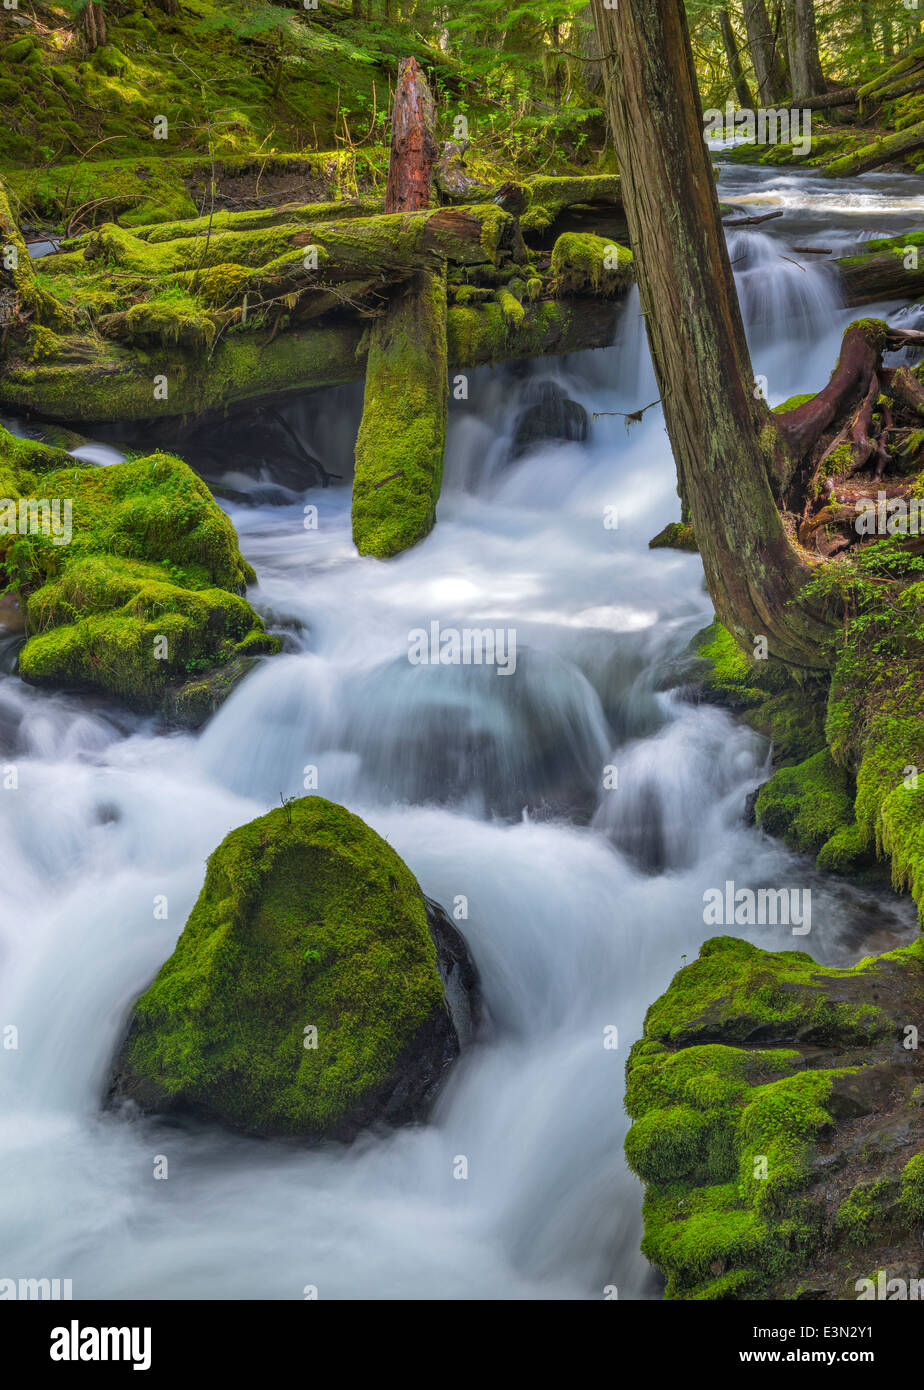 Gifford Pinchot National Forest, Washington: Panther creek flowing through a mossy old growth forest in the Wind River Valley Stock Photo